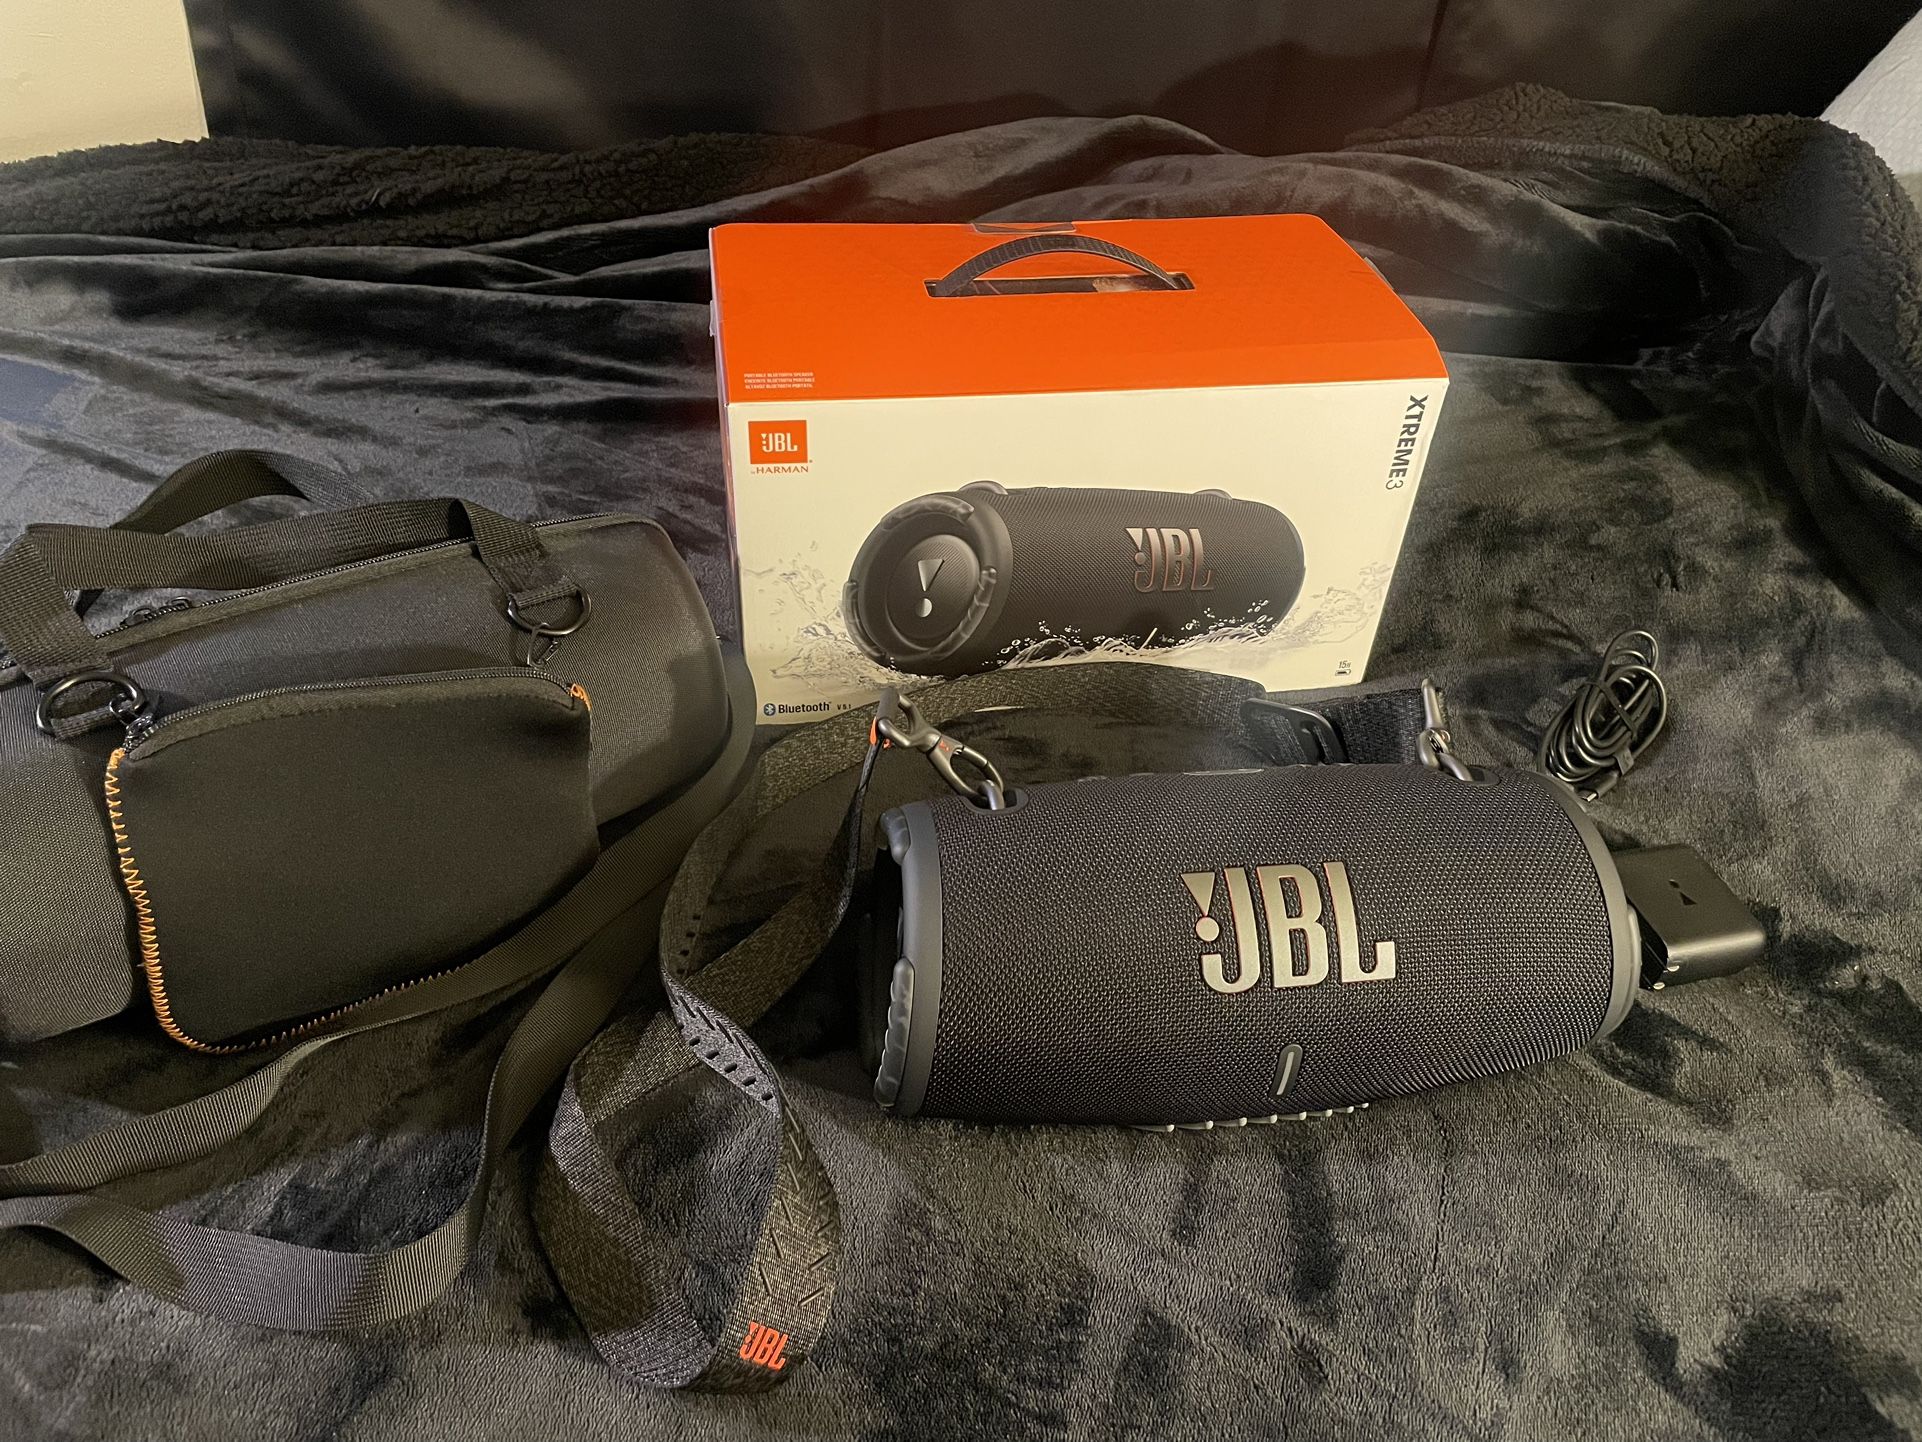 JBL EXTREME 3 BLUETOOTH SPEAKER WITH HARD CARRYING CASE